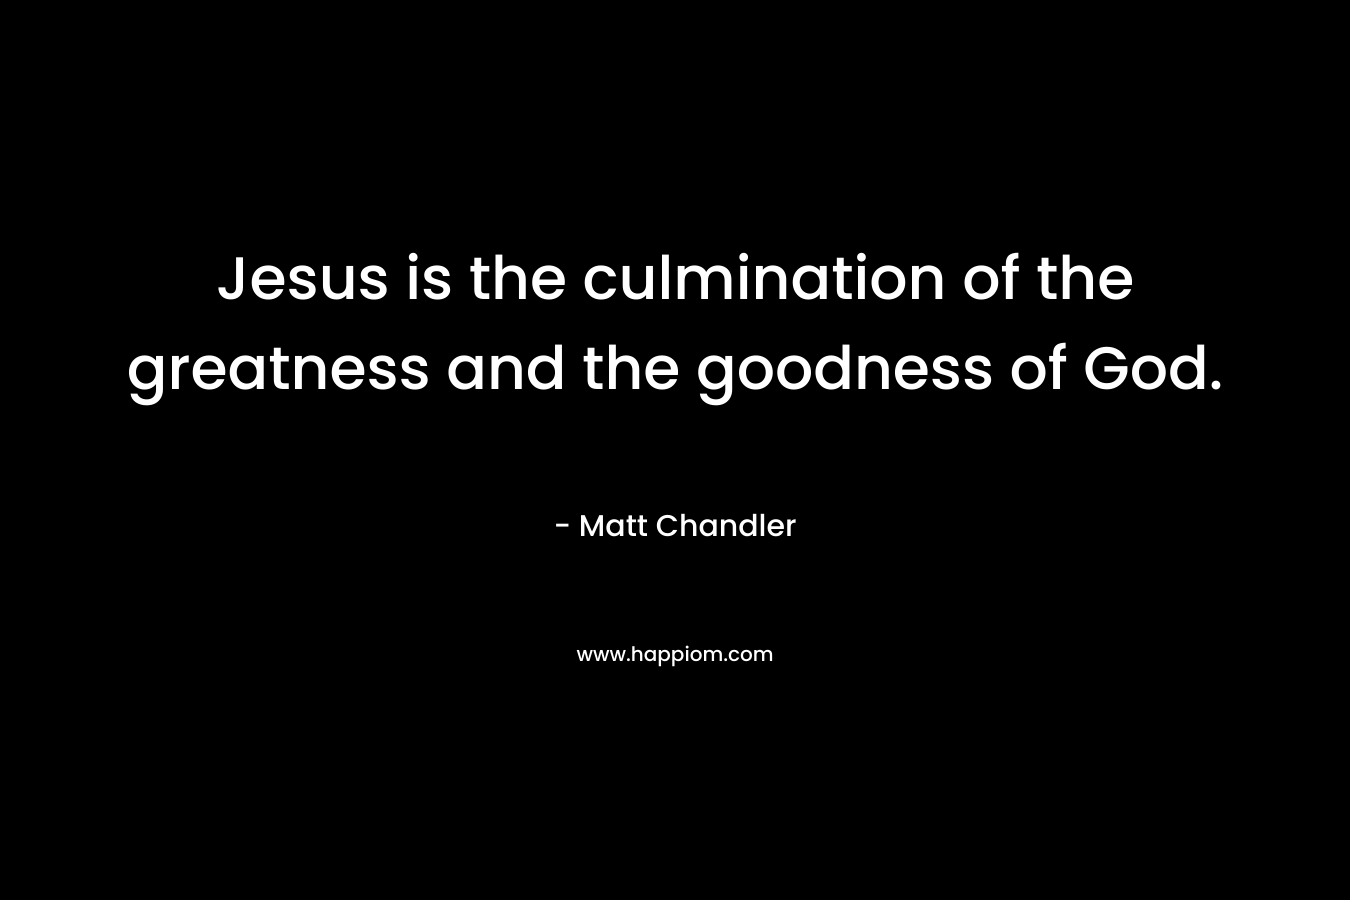 Jesus is the culmination of the greatness and the goodness of God.